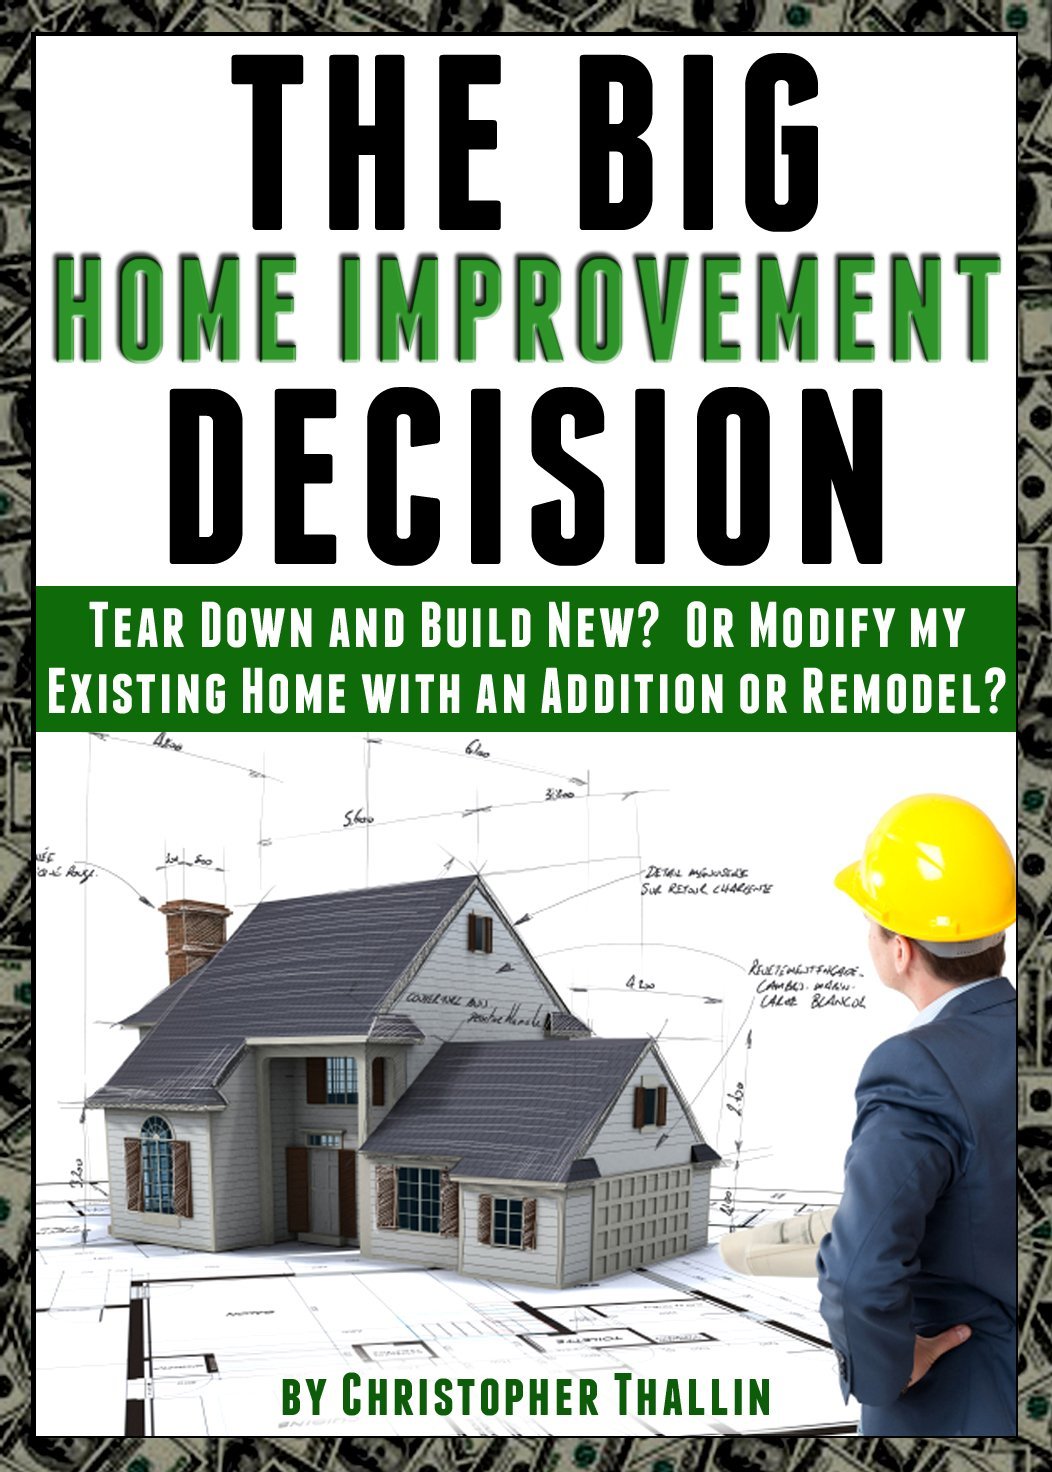 The Big Home Improvement Decision: Tear Down and Build New? Or Modify my Existing Home with an Addition or Remodel? by Christopher Thallin